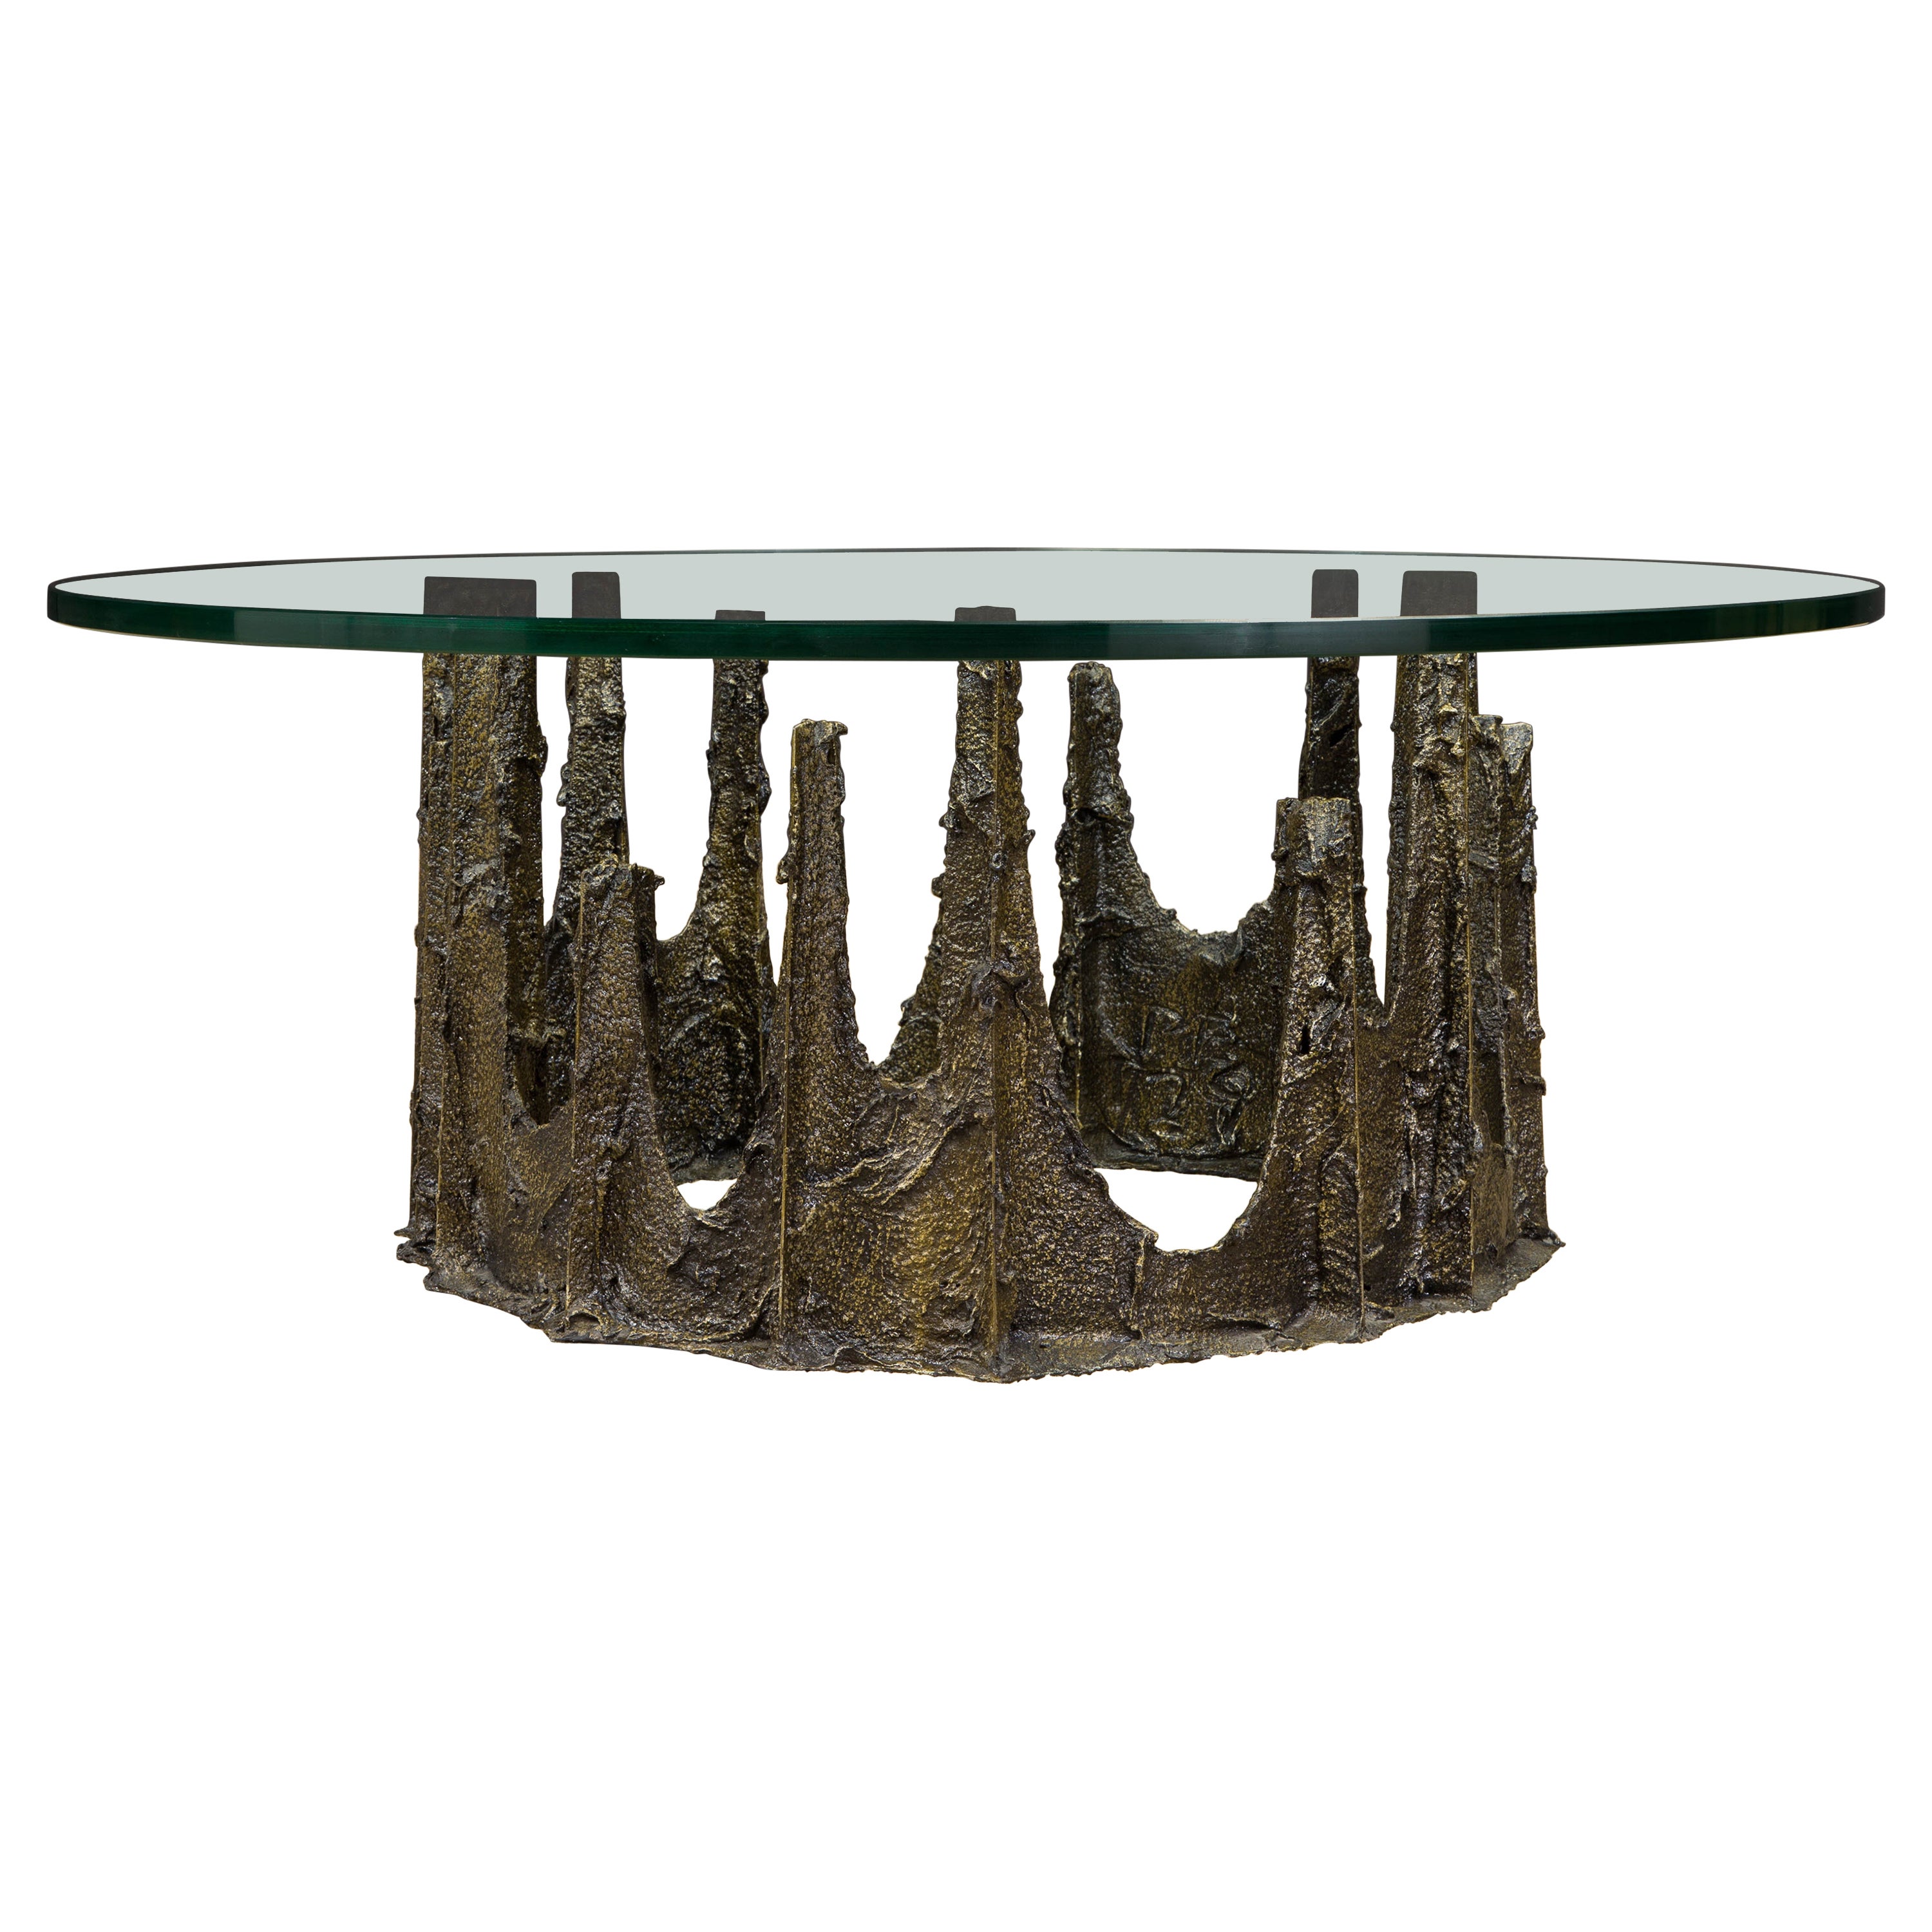 Paul Evans Sculpted Bronze Stalagmite Coffee Table, Signed and Dated 1979